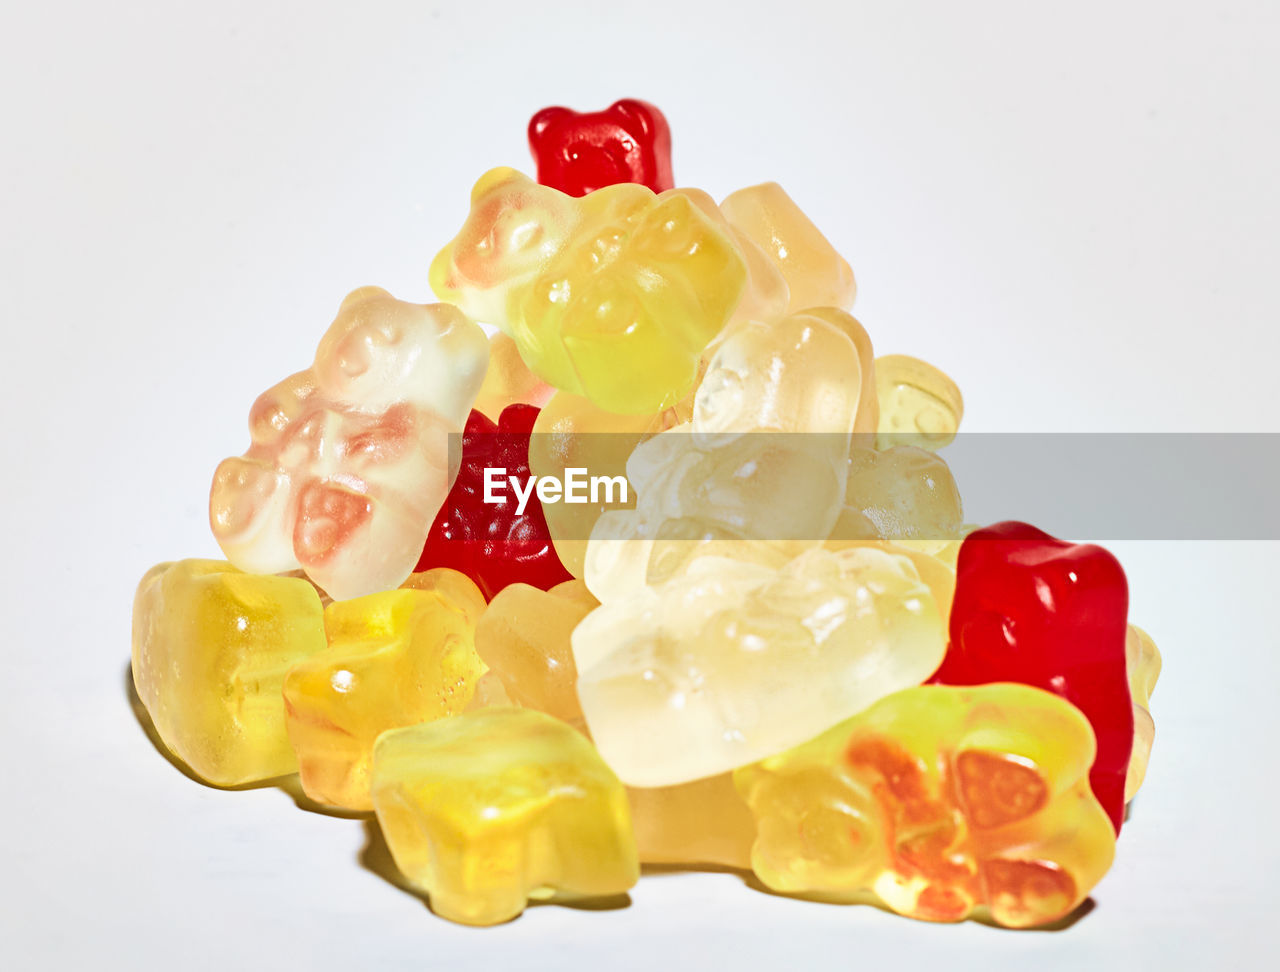 Gummy candy representing social distancing